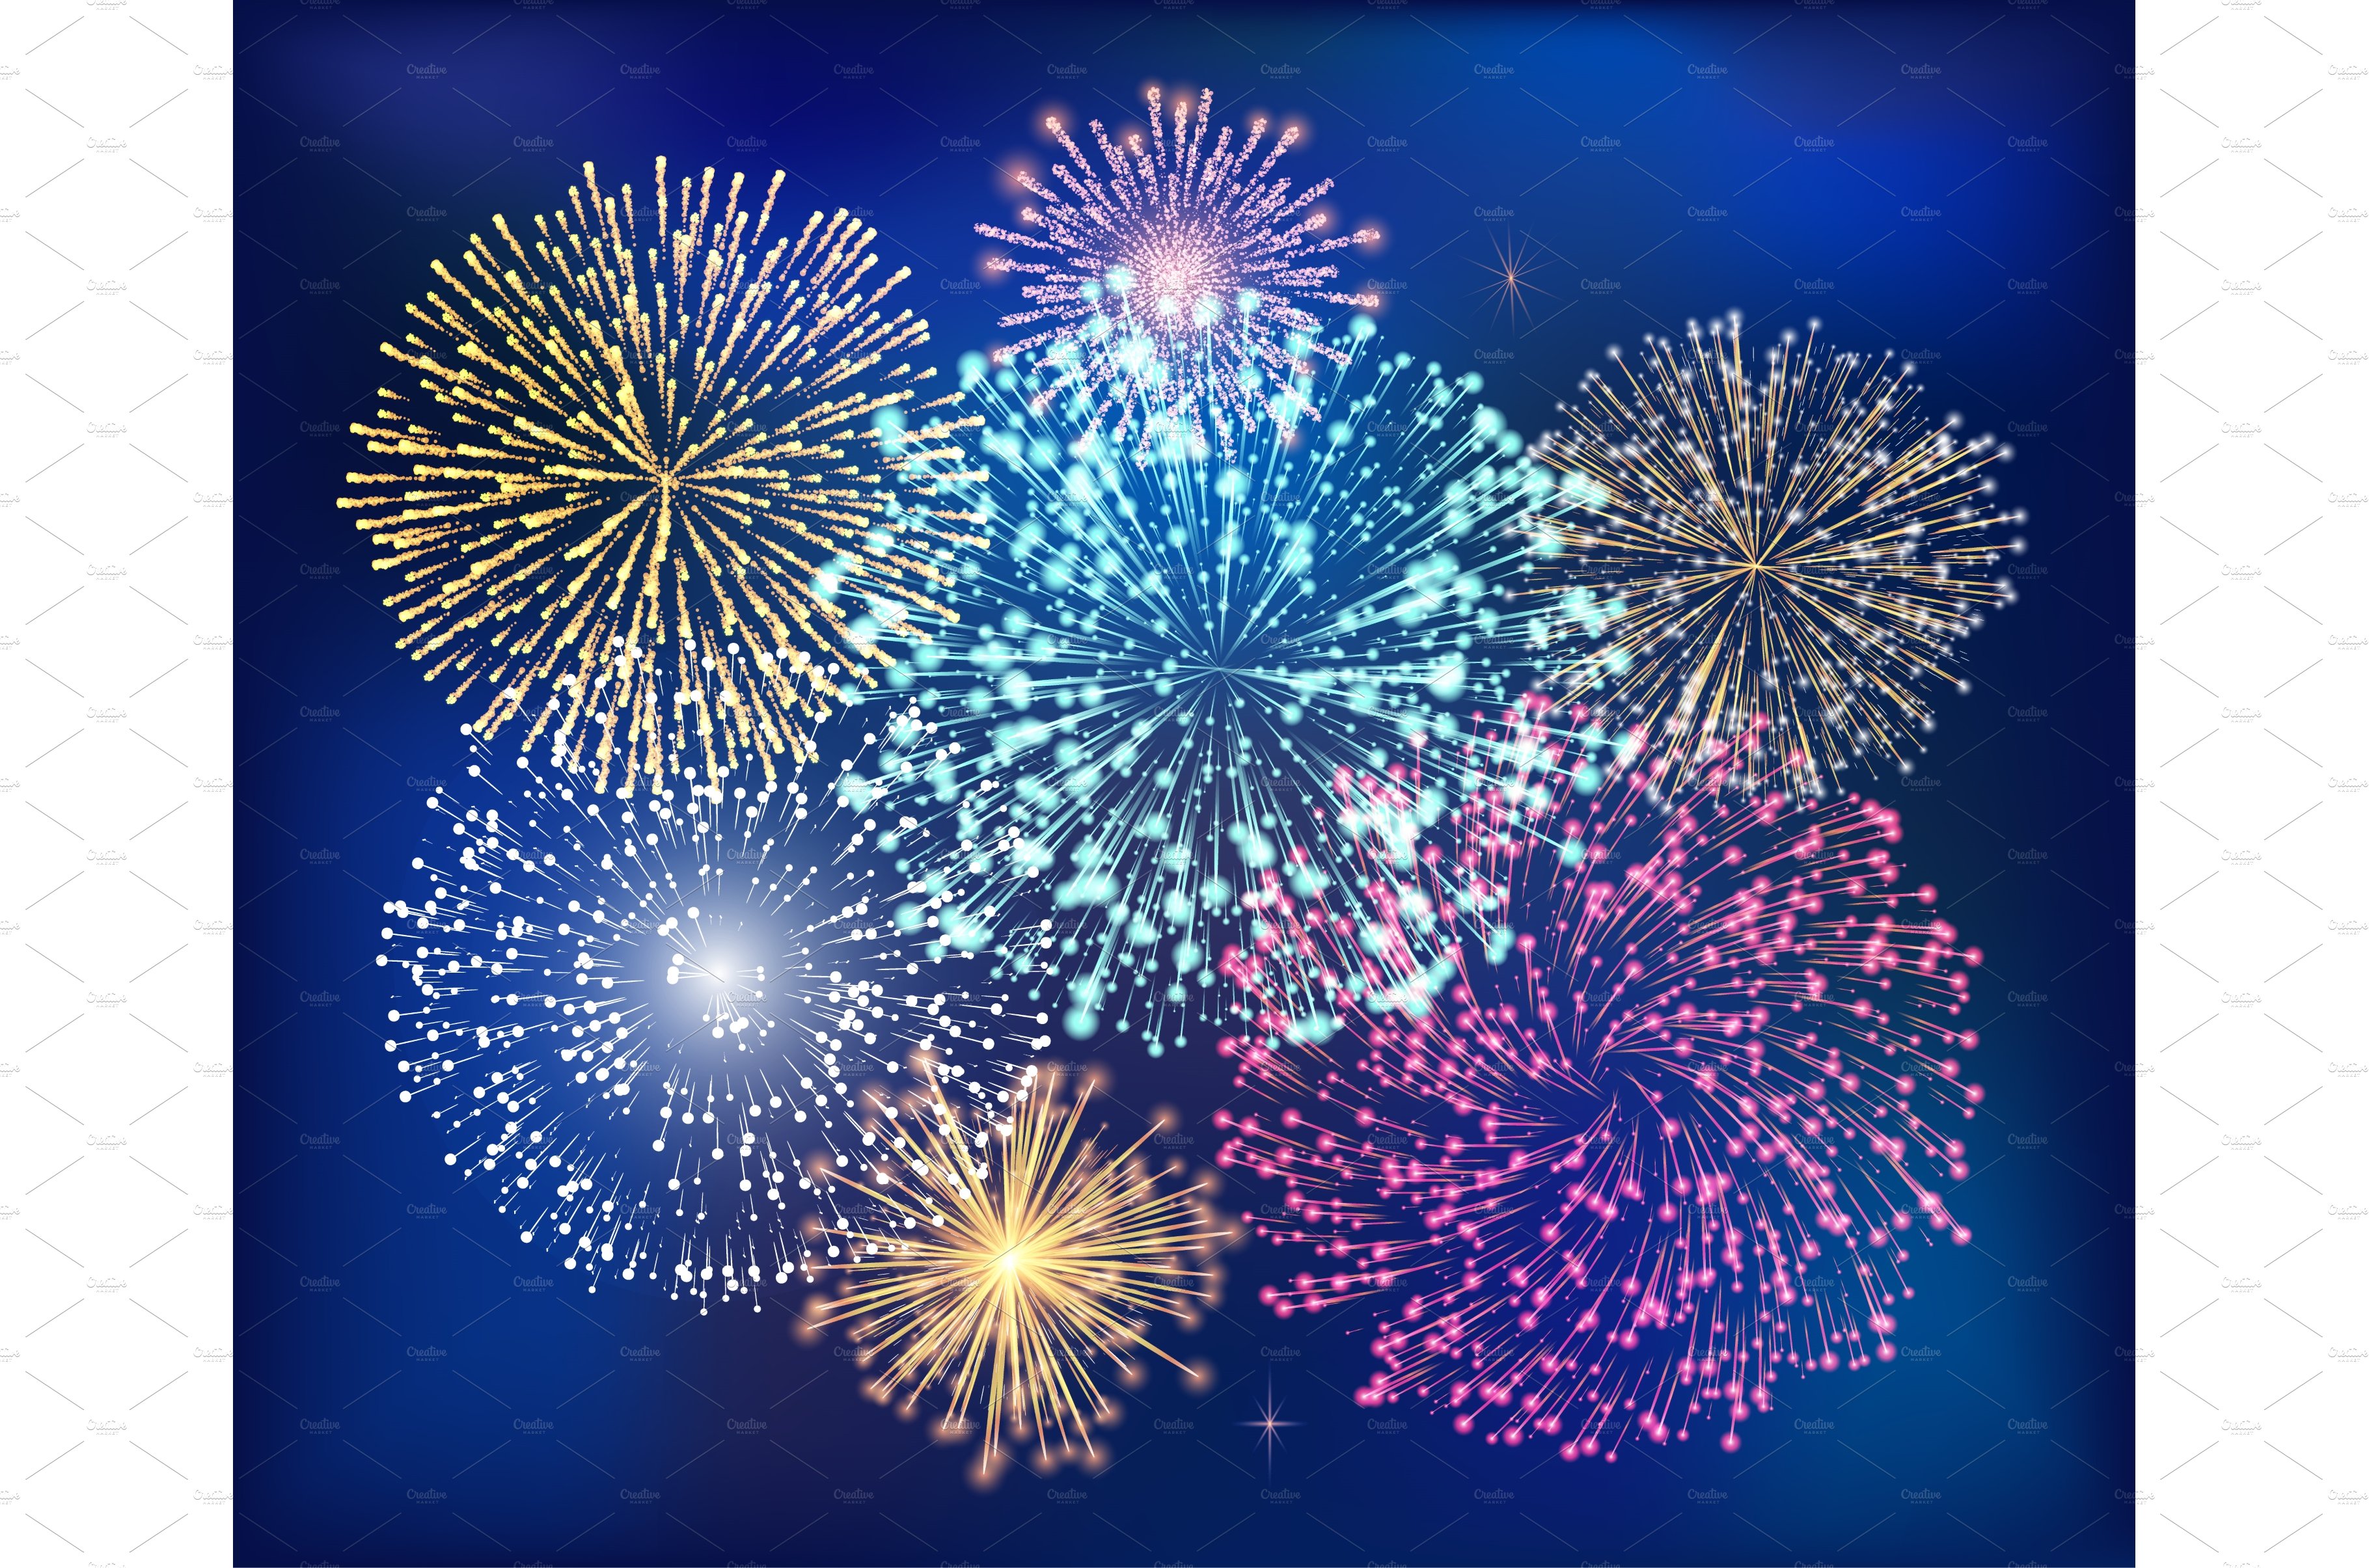 Bright Fireworks at Nighttime Sky cover image.